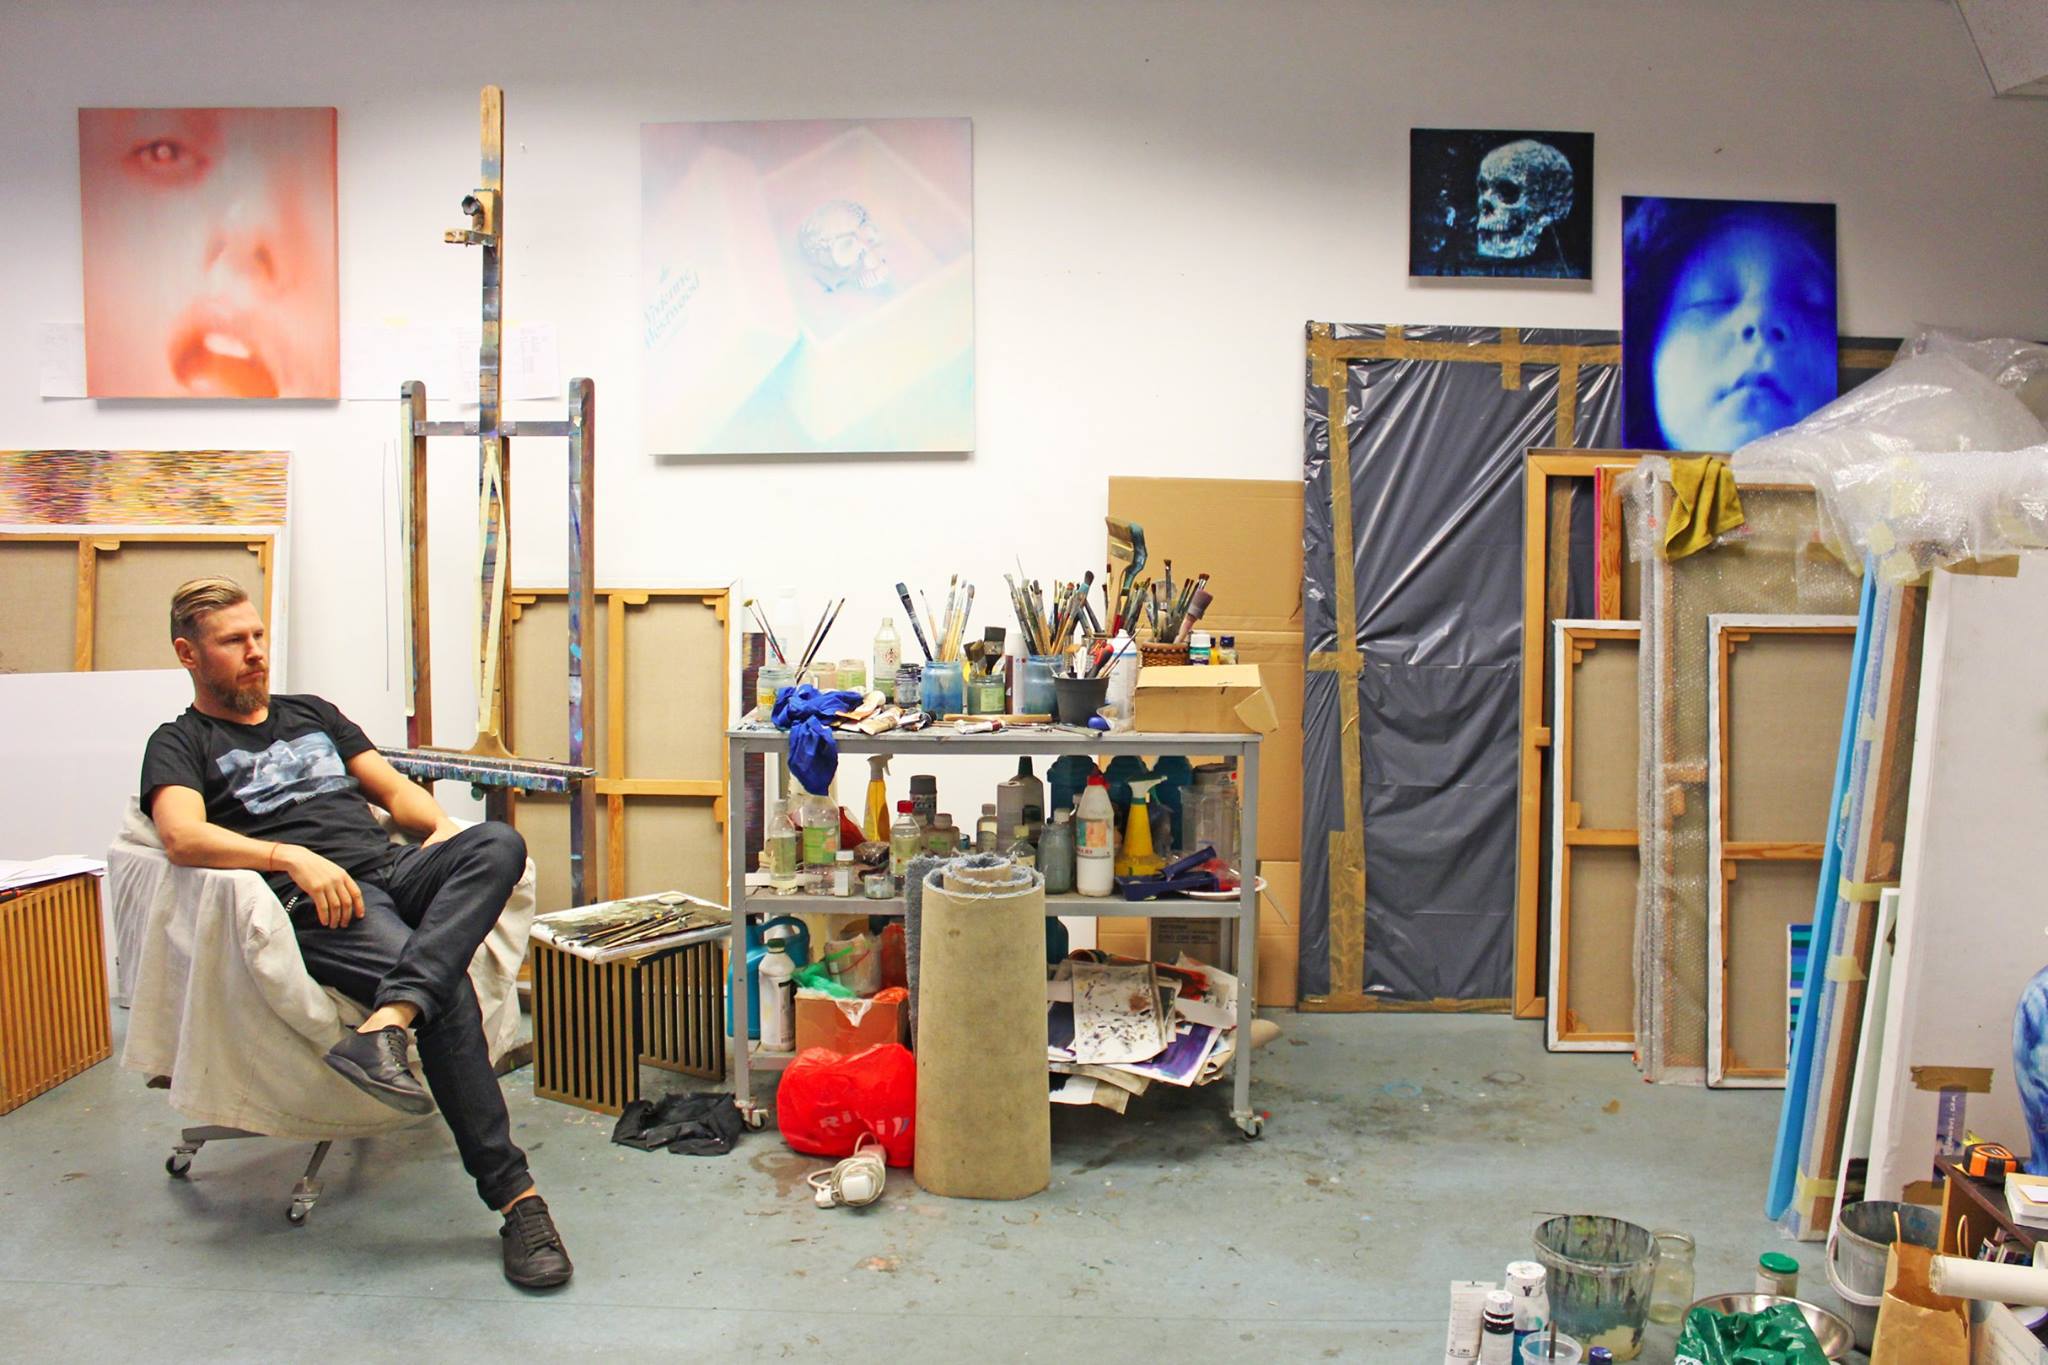 Ritums relaxing in his studio wearing the Tshirt in support of the future art museum